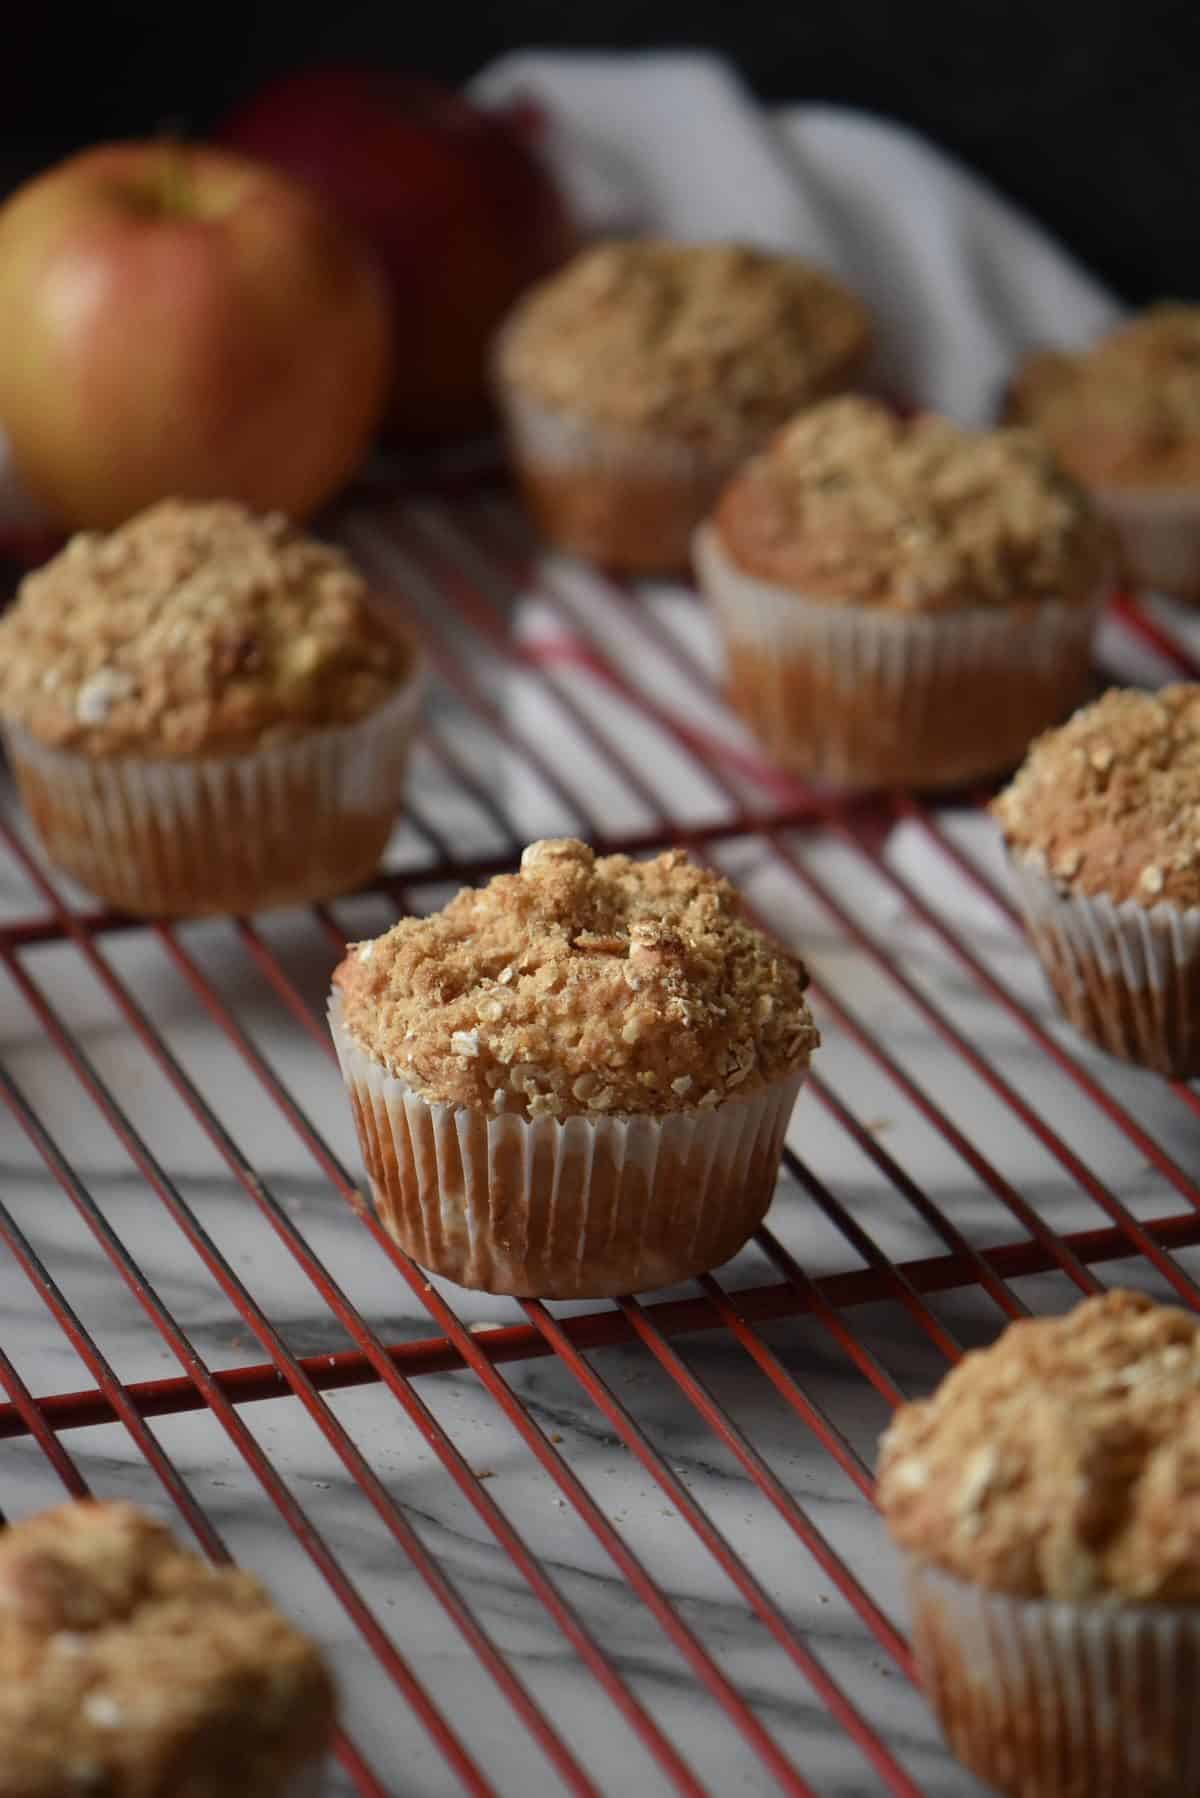 Apple muffins cooling off on a wire rack.